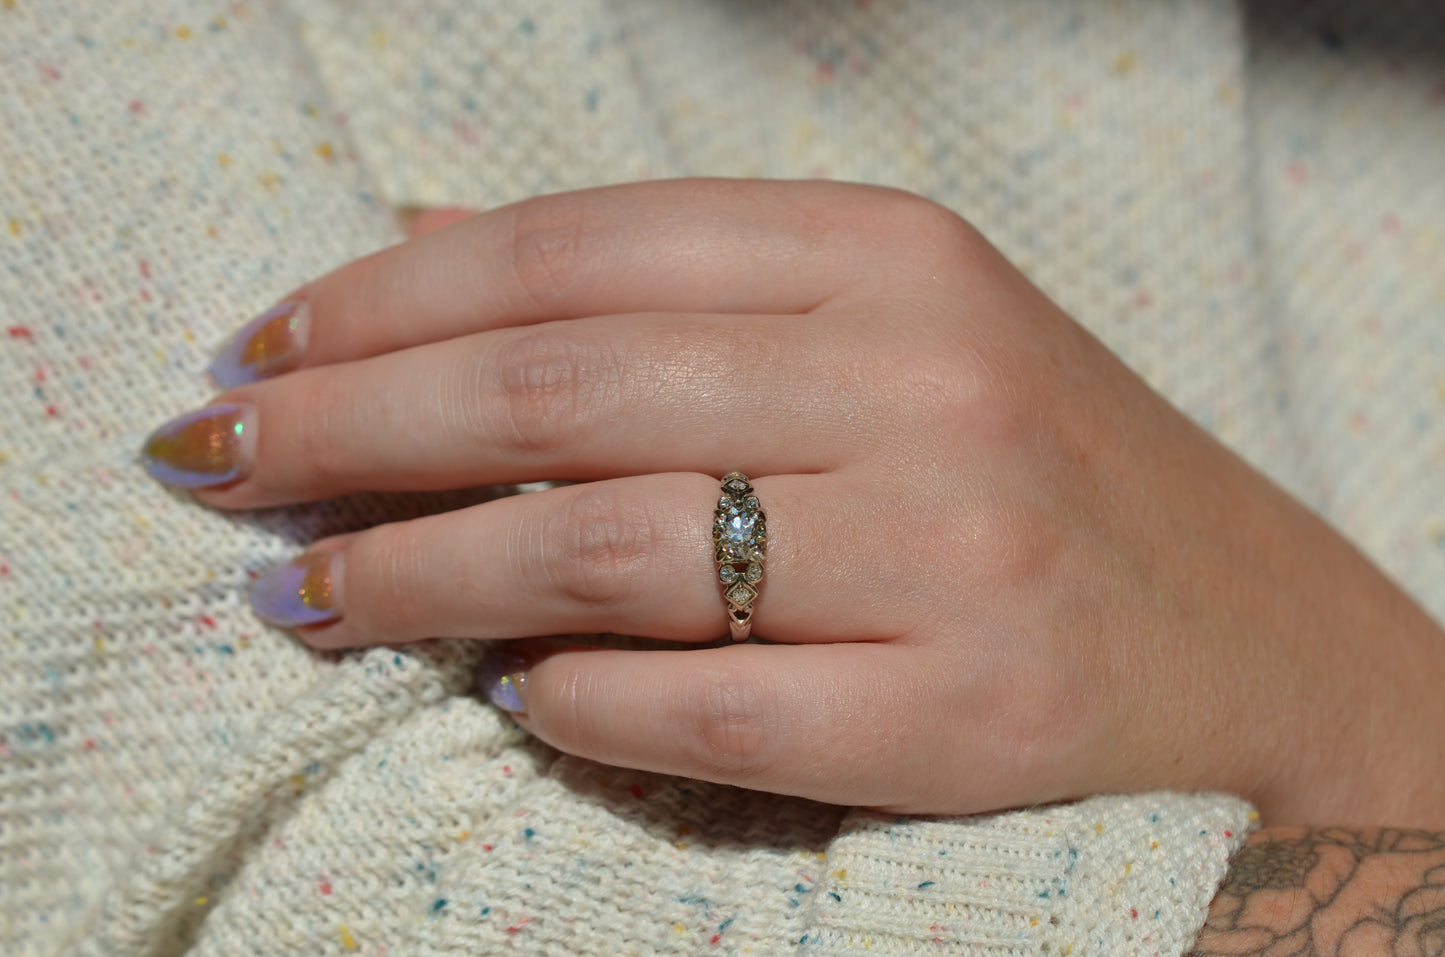 the ring is styled on a caucasian model's left ring finger in direct sunlight. the shoulder details are visible, as well as the model's shimmering gold fingernails and a floral arm tattoo.